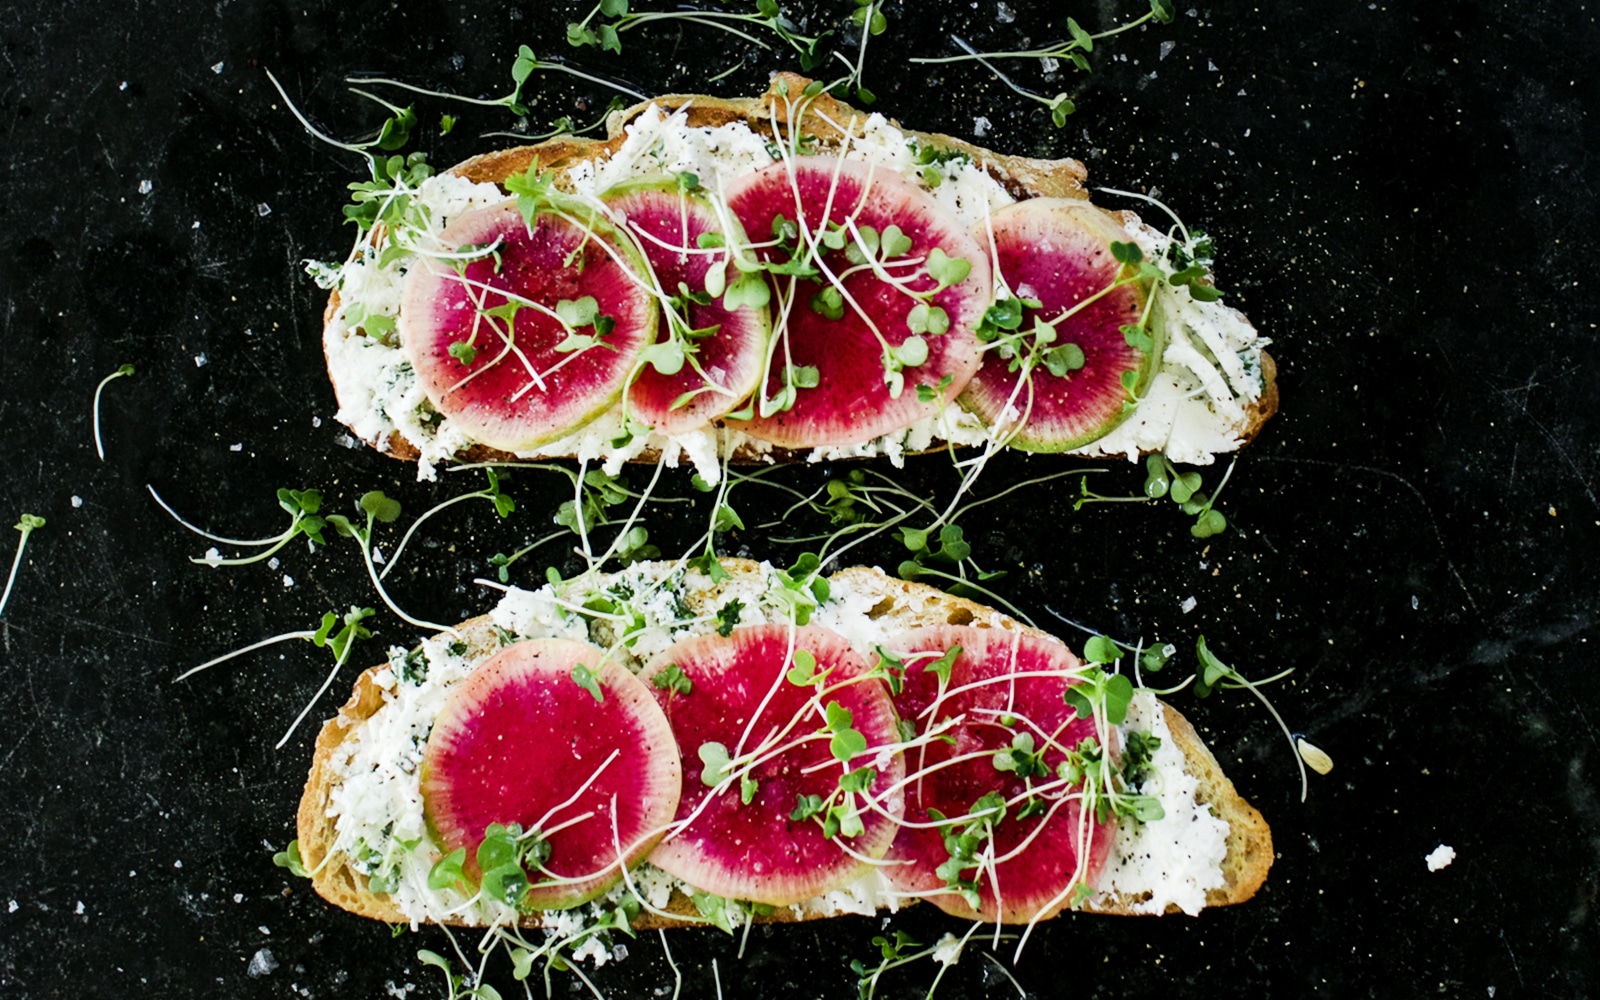 A Simple Spring Toast Recipe of Watermelon Radish and Herbed Goat Cheese. Get the full recipe on The Fresh Exchange.